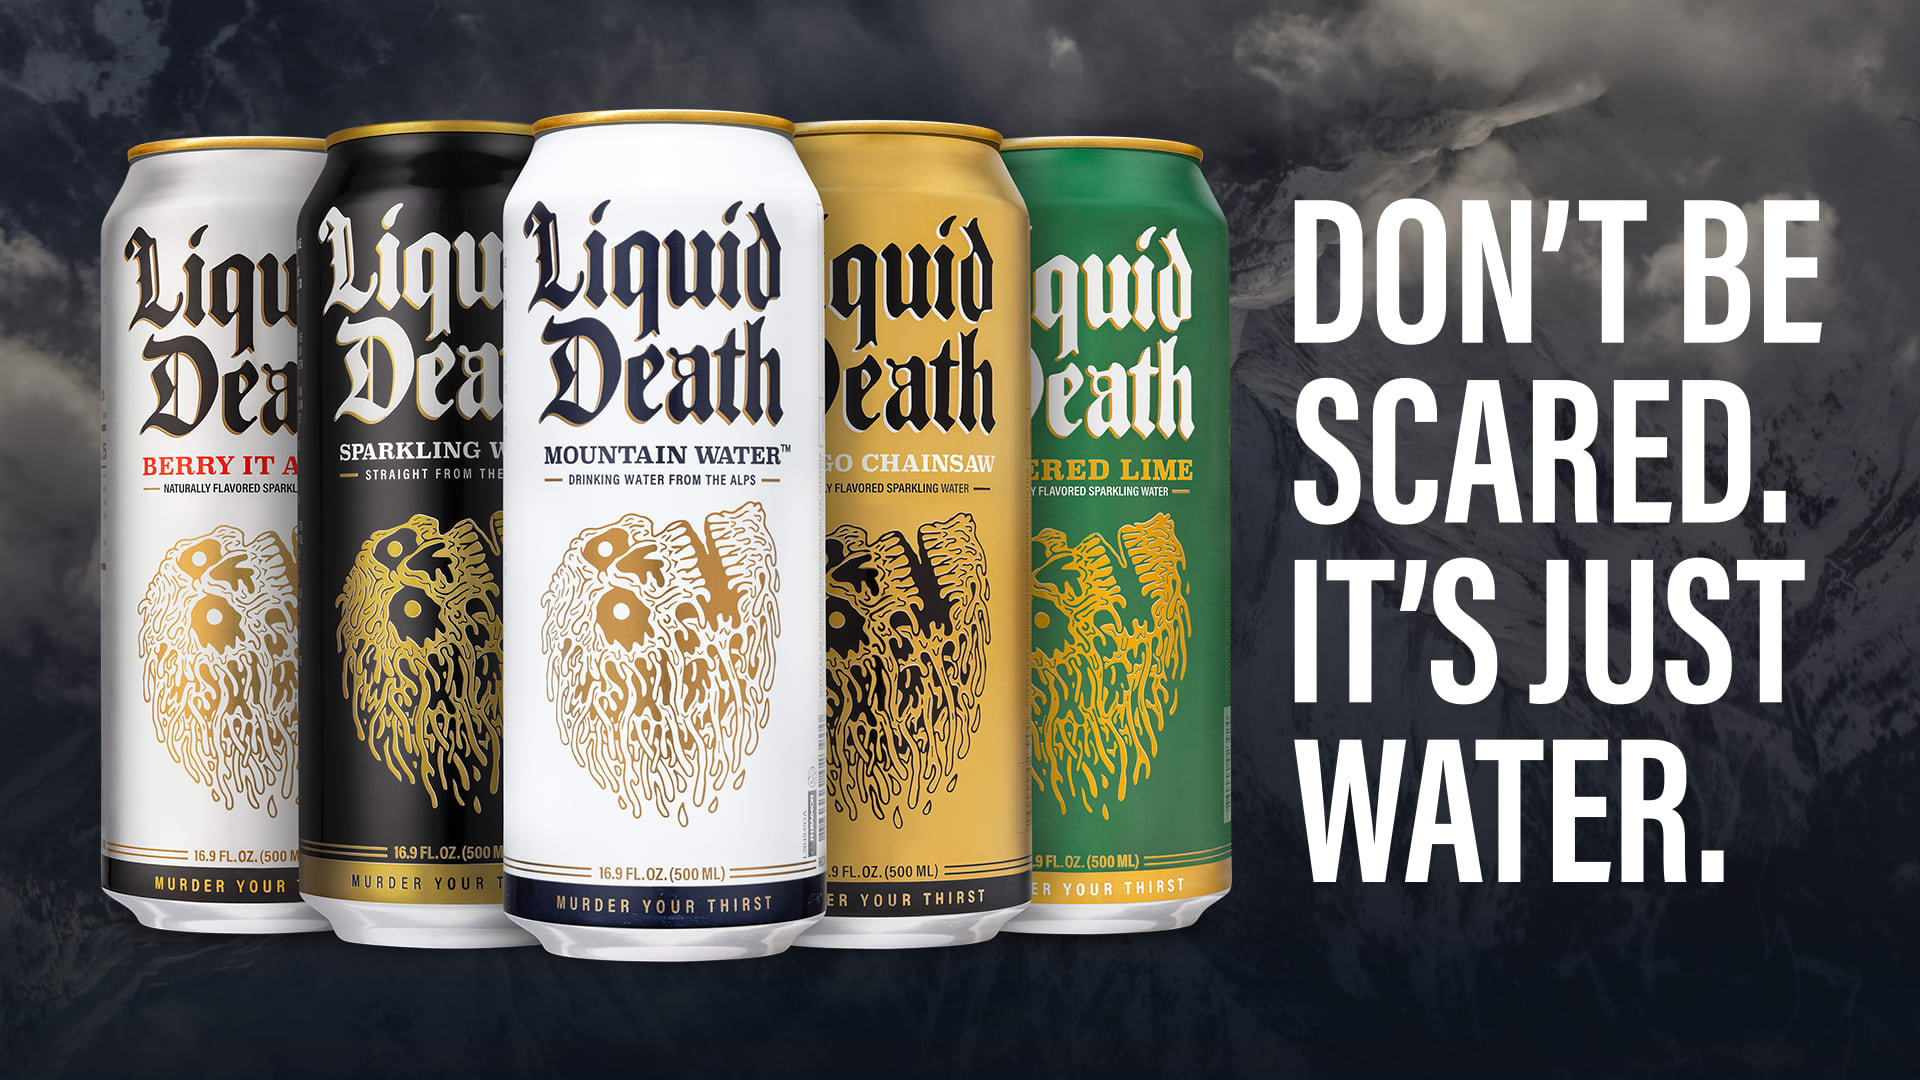 Campagne de communication Liquid Death "Don't be scared. It's just water."